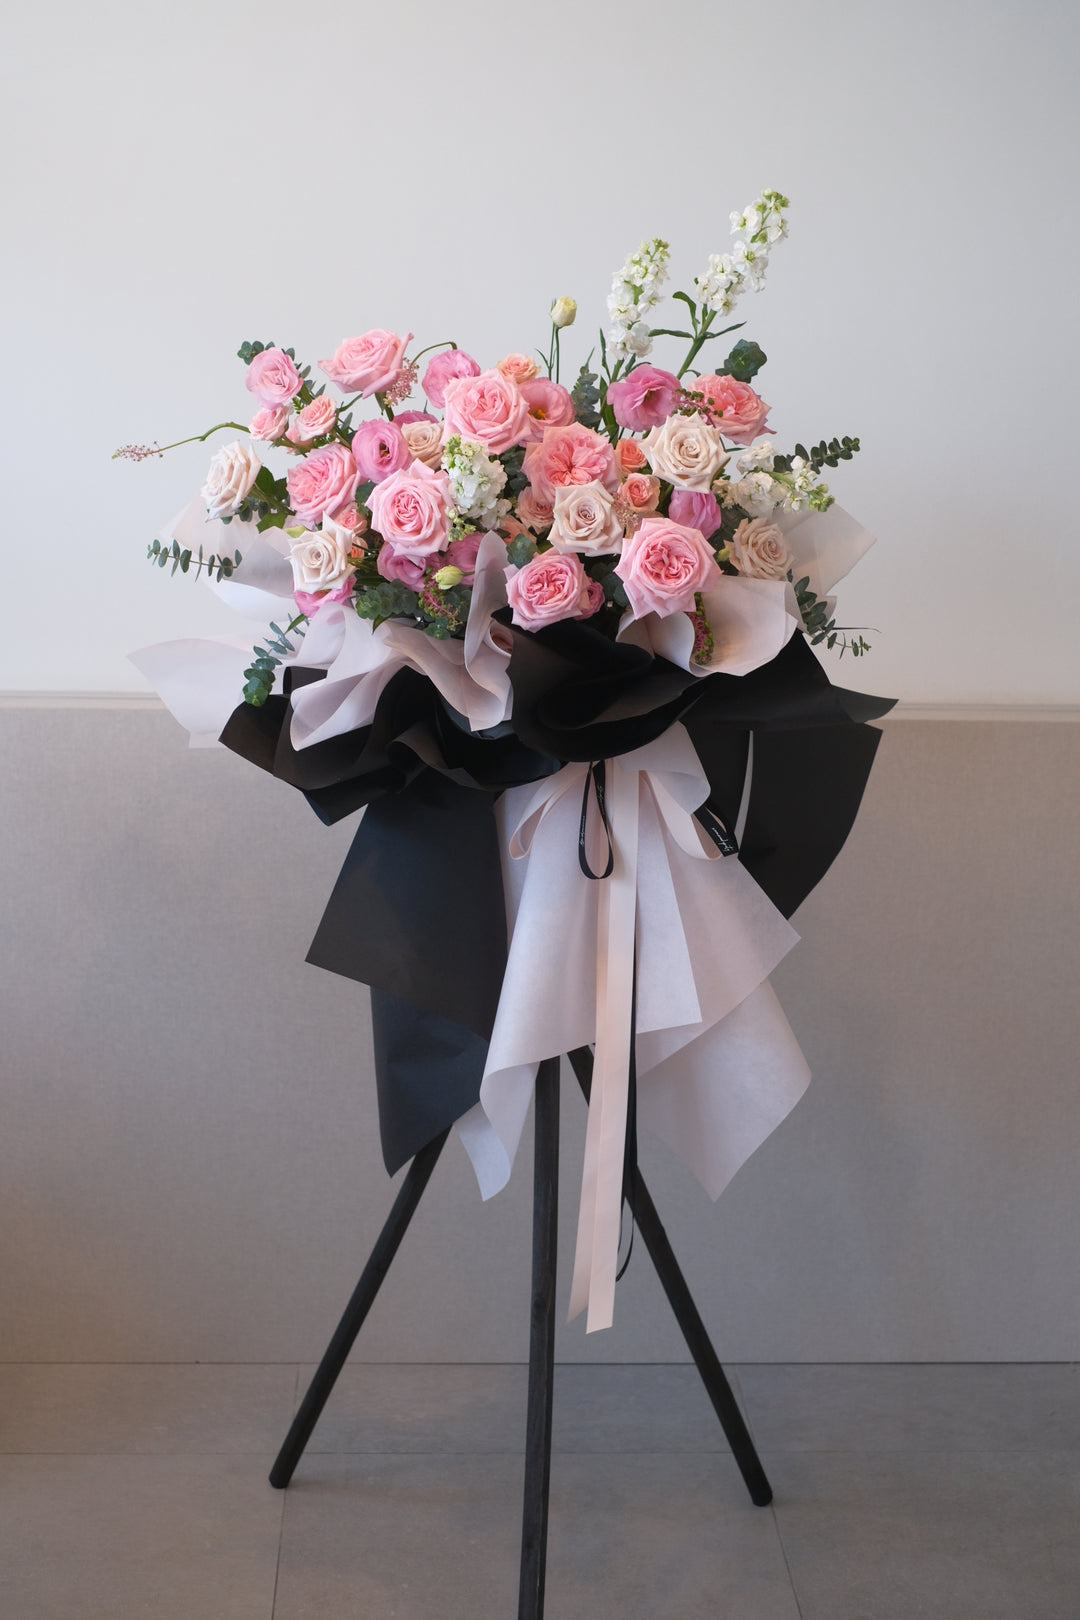 Celebrate your grand opening in style and distinction. Make a statement, create memories, and open the door to your new adventures with our exquisite black pink fresh floral arrangements. Your success story begins here." 🌸🖤🎉  Same day delivery in penang